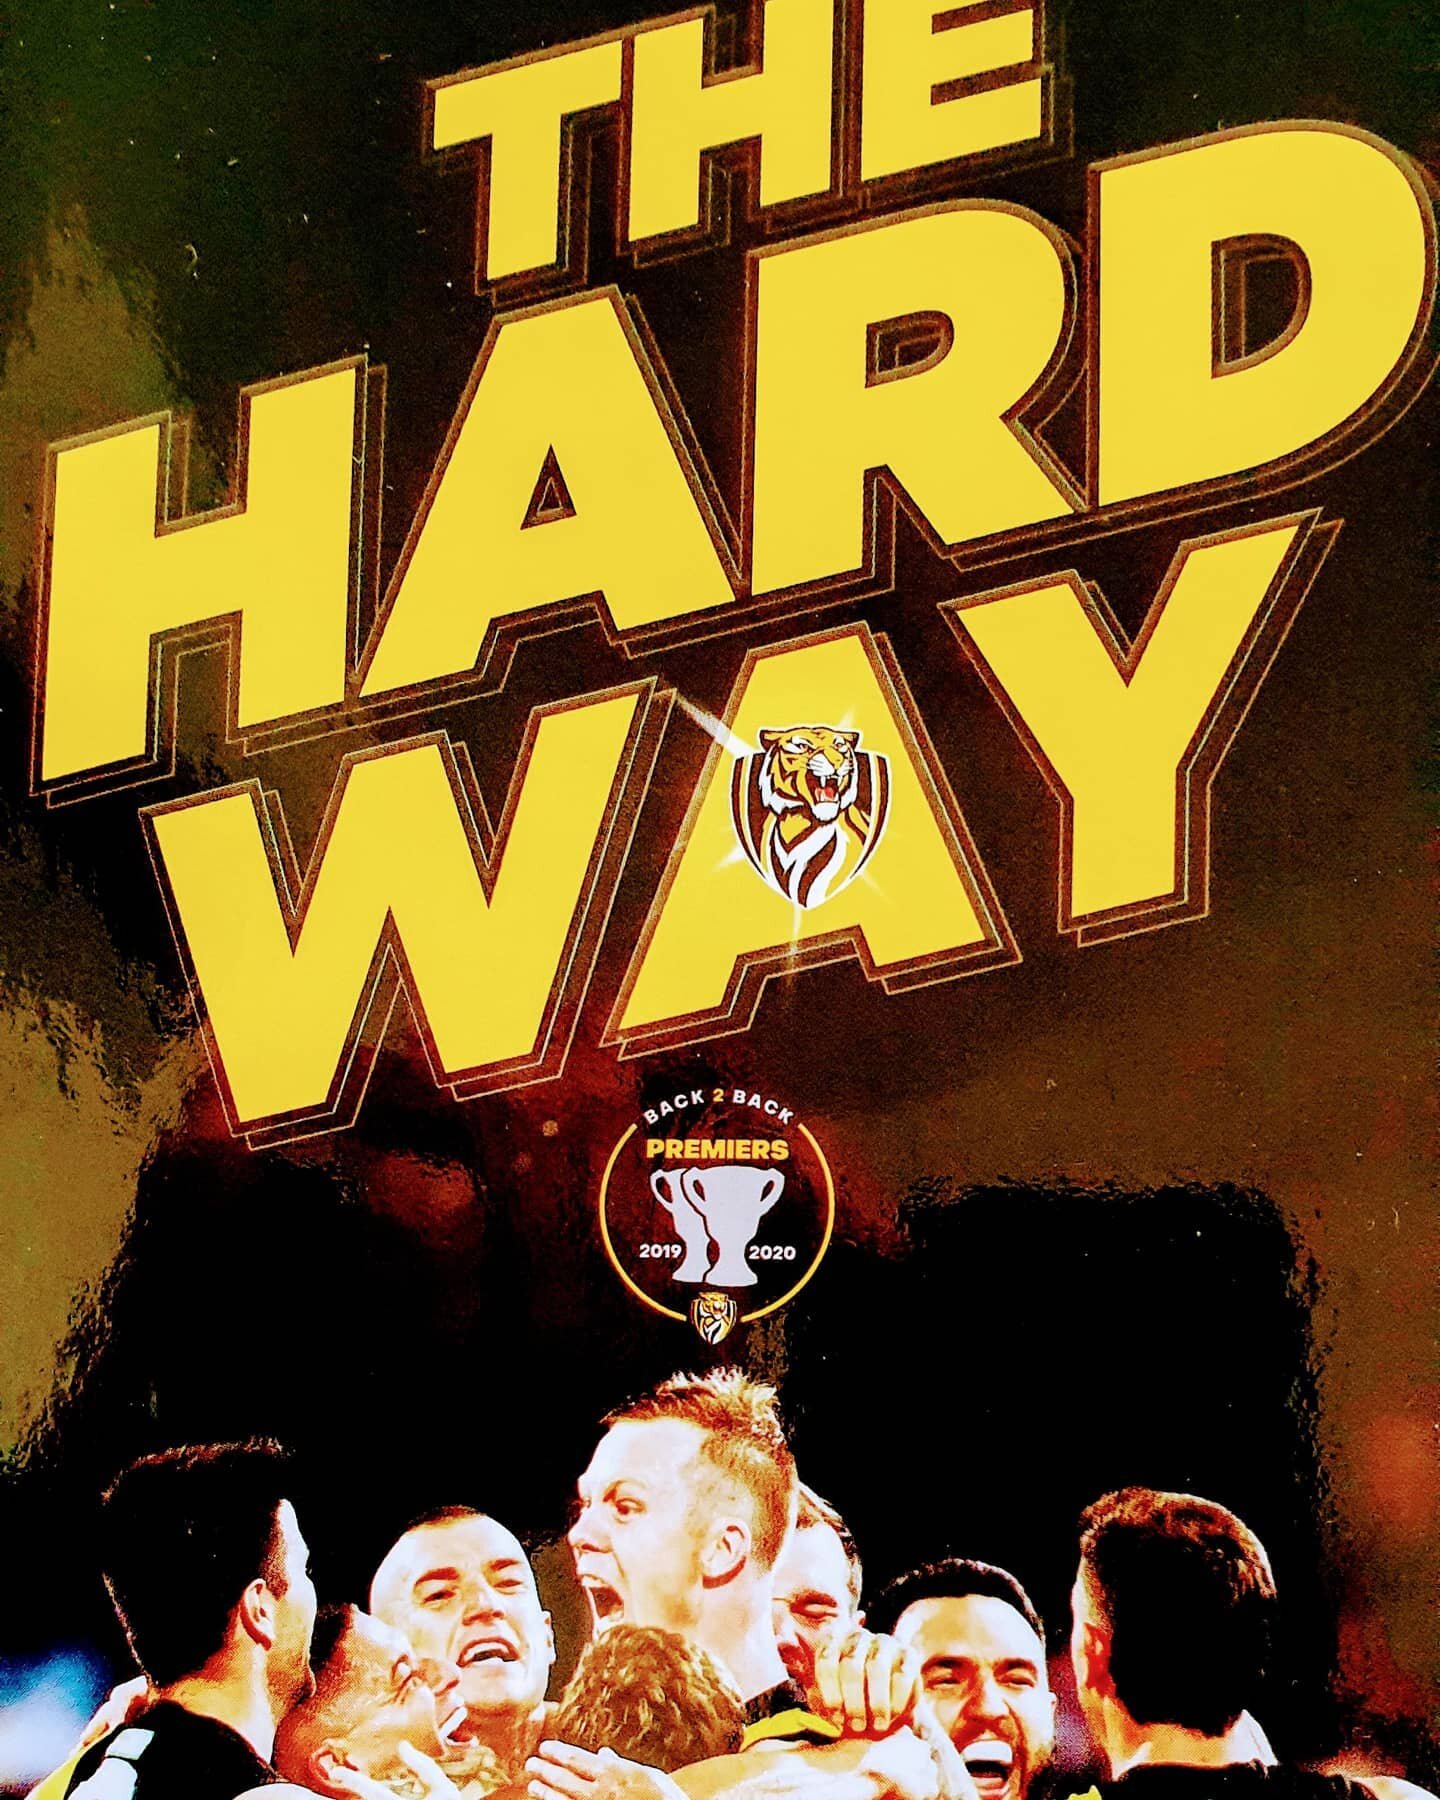 Another Christmas day done and dusted...Reading &quot;The Hard Way&quot; the story of our much loved Richmond's 13th Premiership which sort of sums up this tumultuous year!
Bring on 2021. 🙈🙊🙉